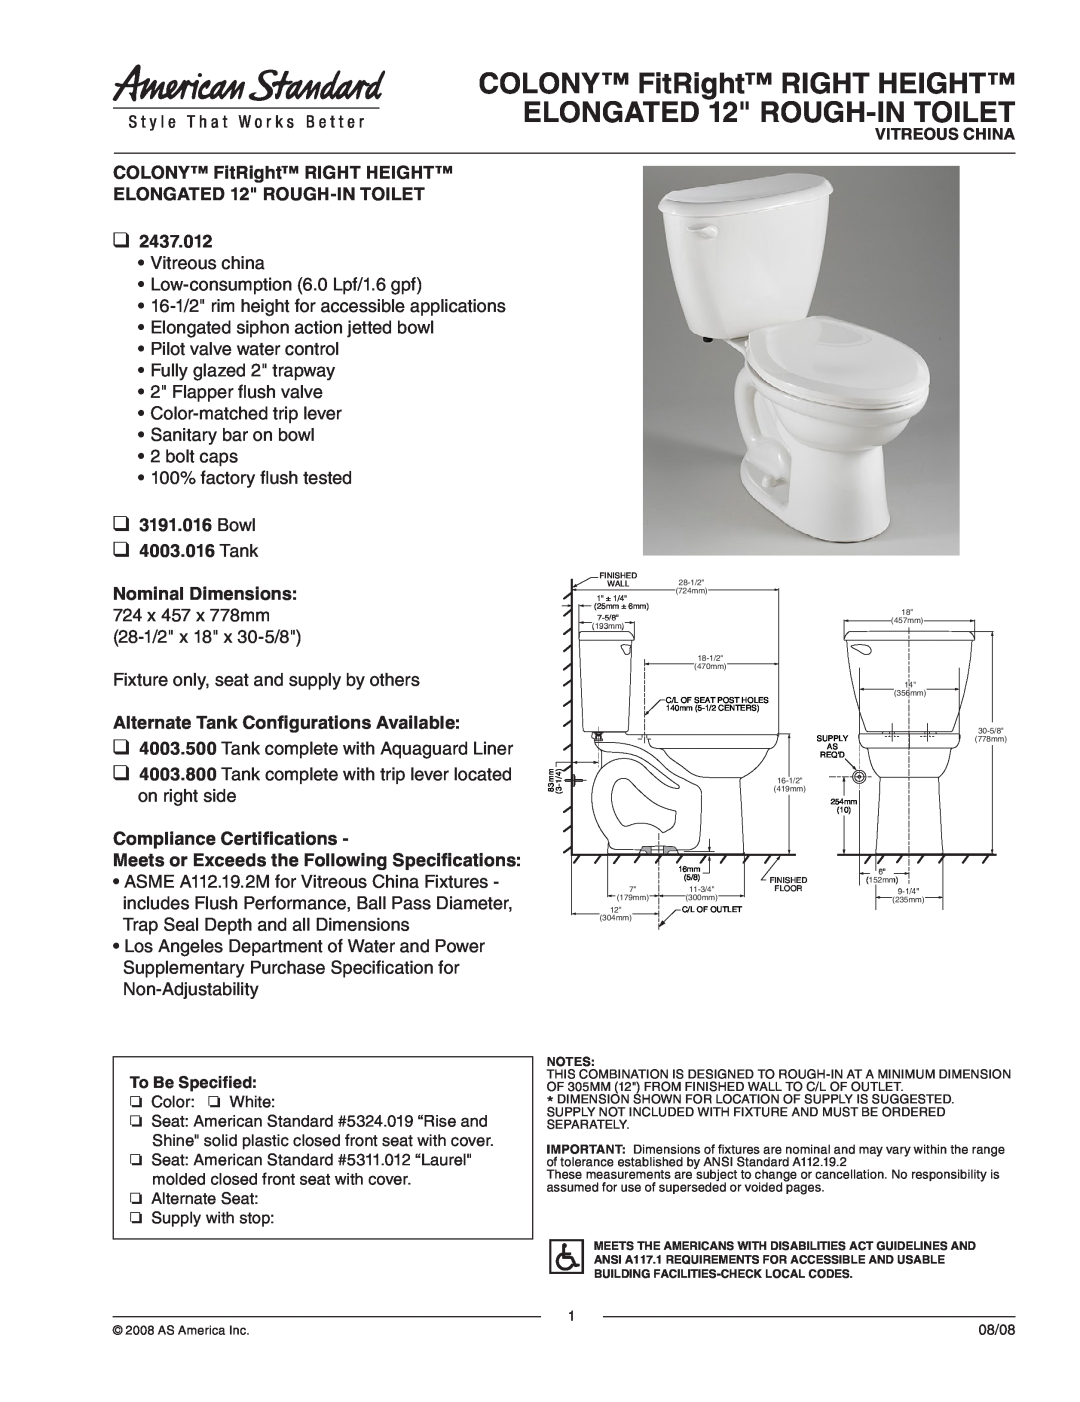 American Standard 3191.016 dimensions COLONY FitRight RIGHT HEIGHT, ELONGATED 12 ROUGH-INTOILET, Bowl 4003.016 Tank 